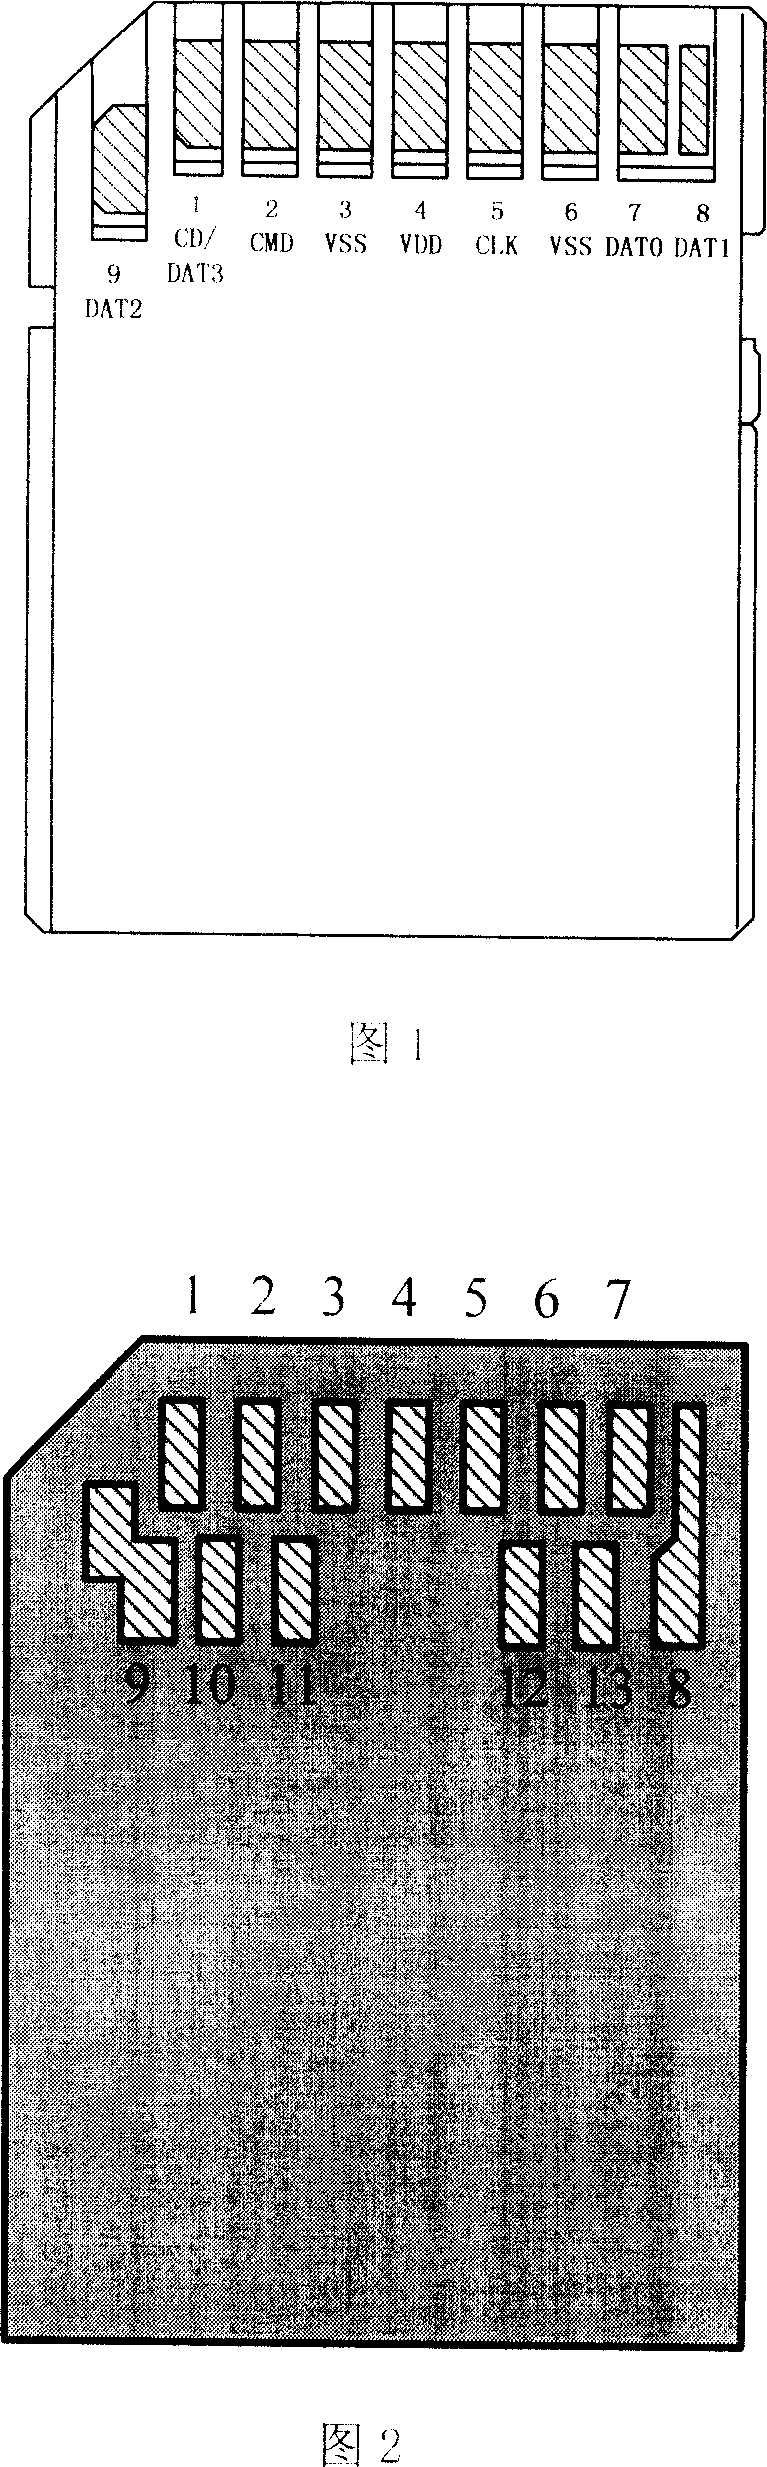 Method for promoting transmission speed of memory card